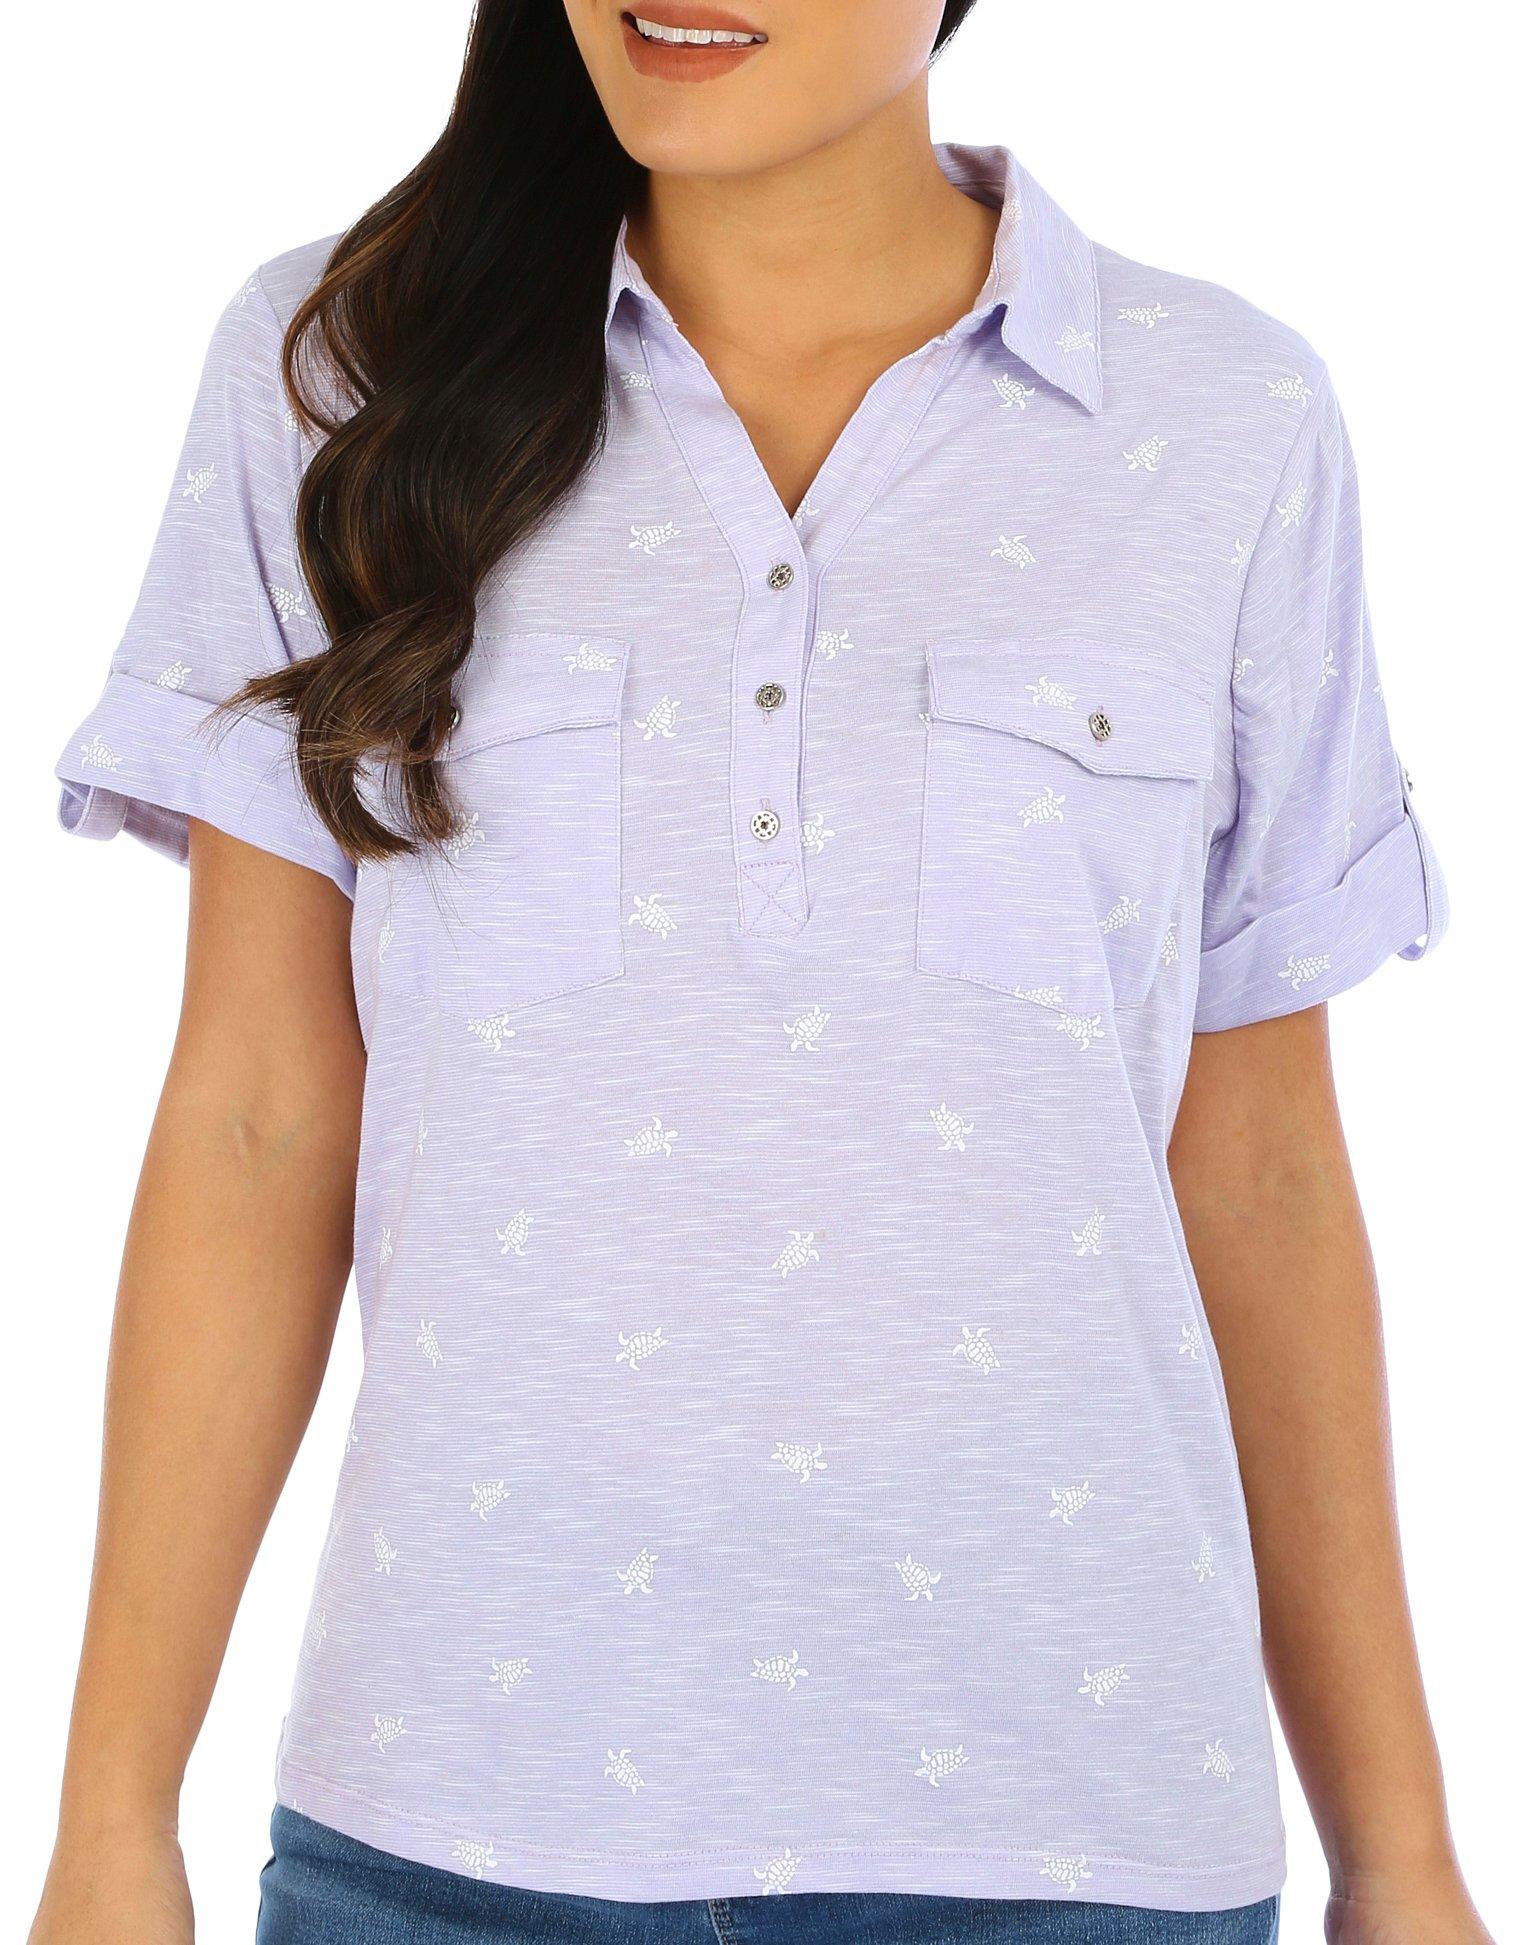 Coral Bay Petite Turtle Print Two-Pocket Short Sleeve Polo